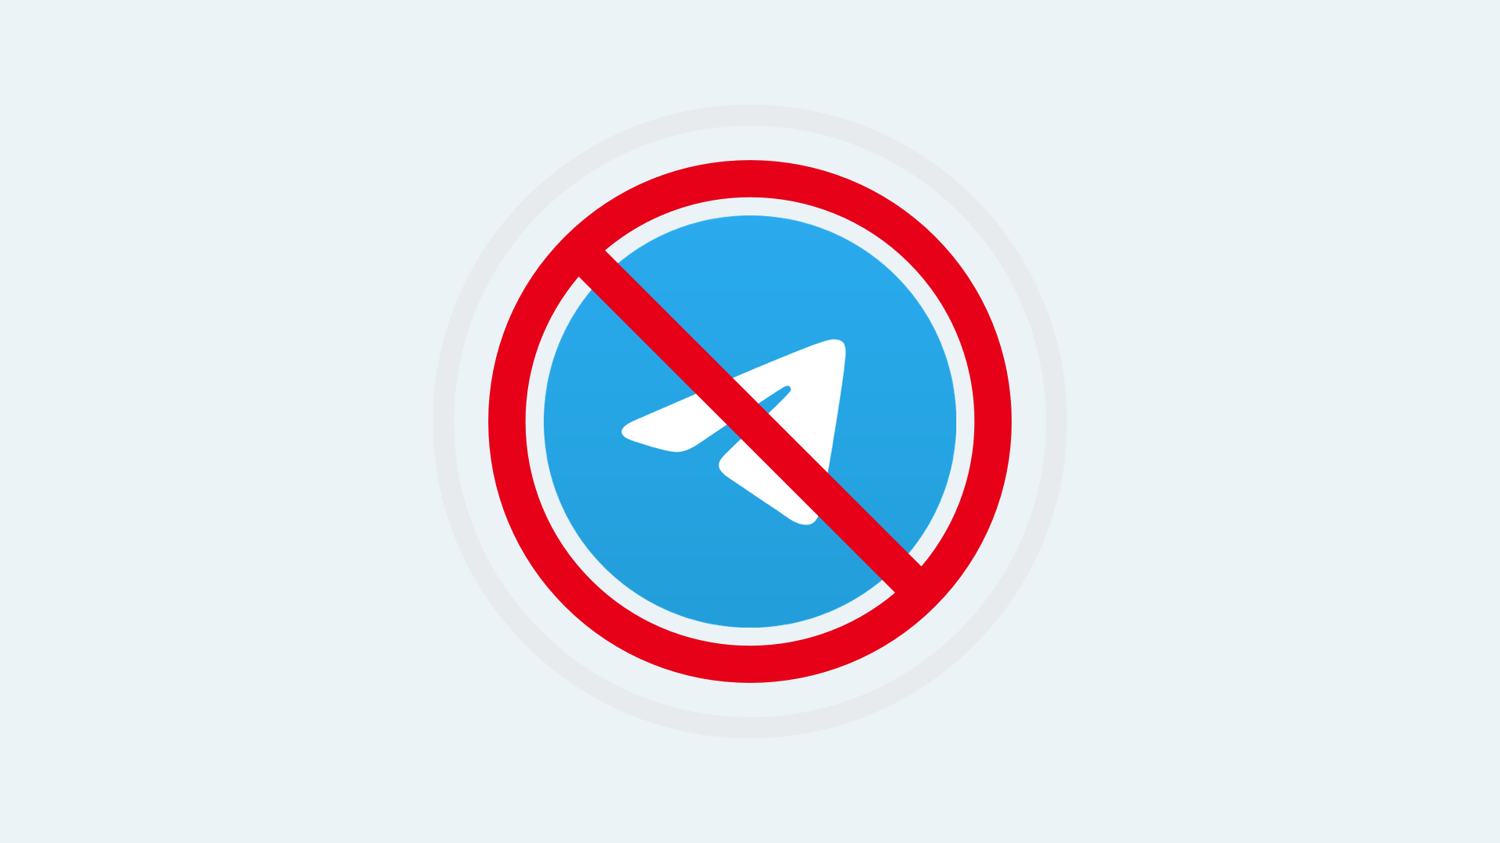 What to do if Telegram is blocked in my country or region?